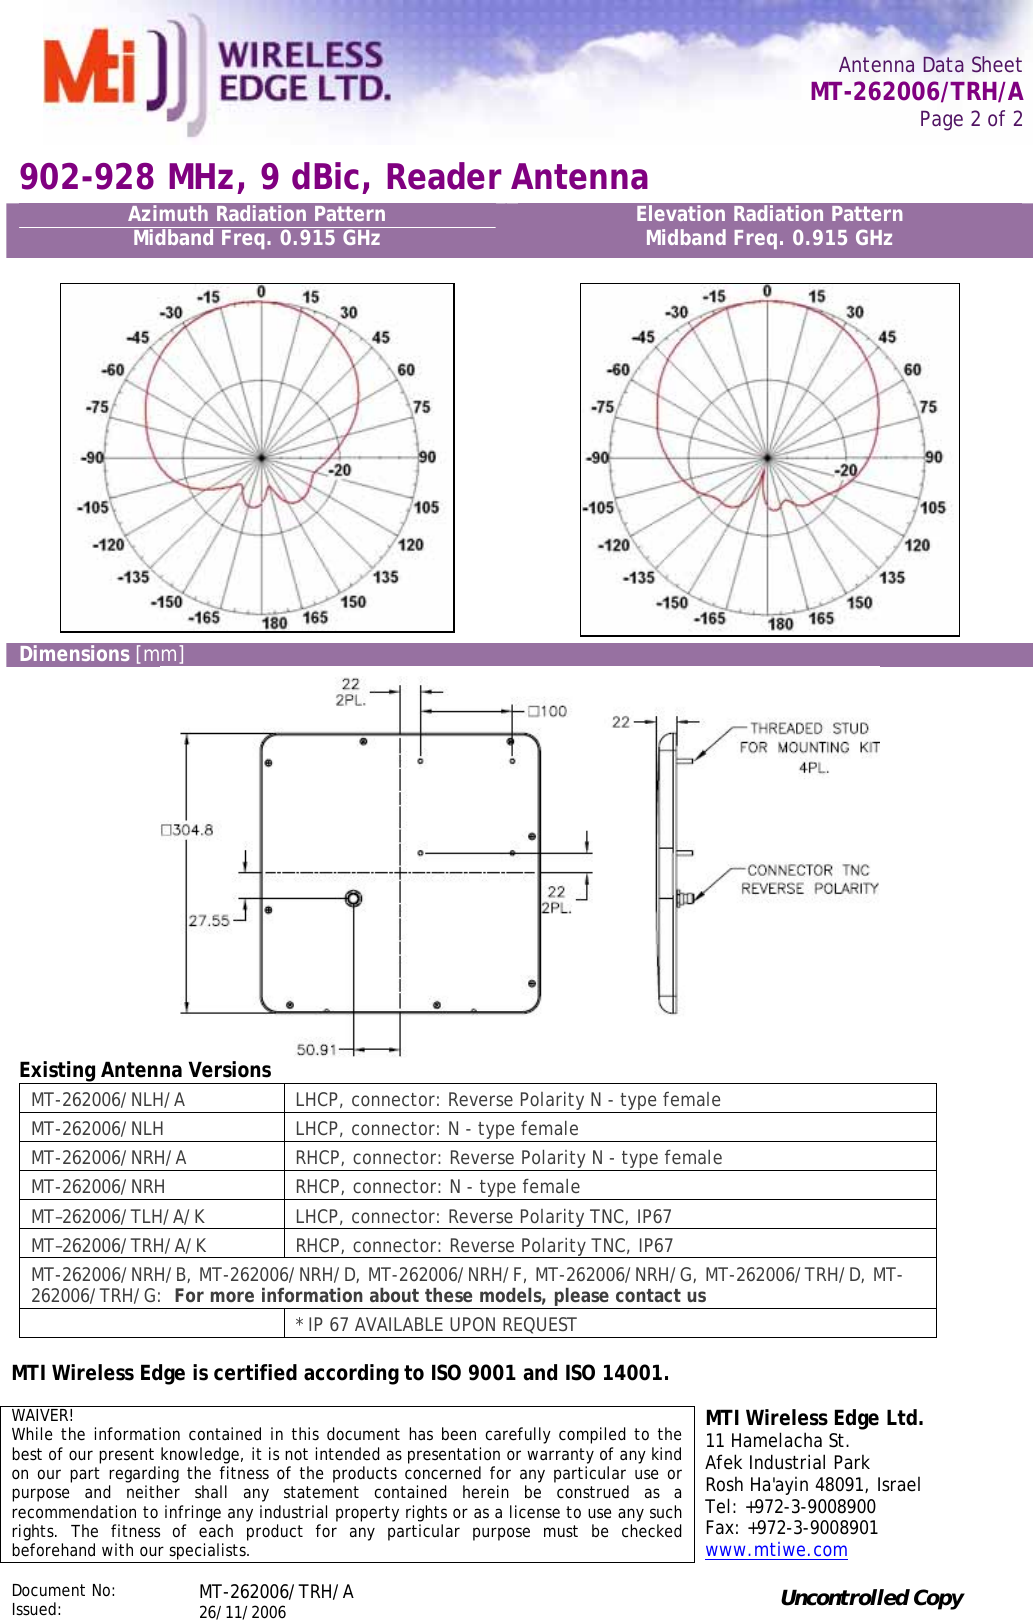   Antenna Data Sheet   MT-262006/TRH/A Page 2 of 2  902-928 MHz, 9 dBic, Reader Antenna Azimuth Radiation Pattern Midband Freq. 0.915 GHz  Elevation Radiation Pattern  Midband Freq. 0.915 GHz   Dimensions [mm]  Existing Antenna Versions MT-262006/NLH/A  LHCP, connector: Reverse Polarity N - type female MT-262006/NLH  LHCP, connector: N - type female MT-262006/NRH/A  RHCP, connector: Reverse Polarity N - type female MT-262006/NRH  RHCP, connector: N - type female MT–262006/TLH/A/K  LHCP, connector: Reverse Polarity TNC, IP67 MT–262006/TRH/A/K  RHCP, connector: Reverse Polarity TNC, IP67 MT-262006/NRH/B, MT-262006/NRH/D, MT-262006/NRH/F, MT-262006/NRH/G, MT-262006/TRH/D, MT-262006/TRH/G:  For more information about these models, please contact us   * IP 67 AVAILABLE UPON REQUEST    MTI Wireless Edge is certified according to ISO 9001 and ISO 14001.   WAIVER! While the information contained in this document has been carefully compiled to the best of our present knowledge, it is not intended as presentation or warranty of any kind on our part regarding the fitness of the products concerned for any particular use or purpose and neither shall any statement contained herein be construed as a recommendation to infringe any industrial property rights or as a license to use any such rights. The fitness of each product for any particular purpose must be checked beforehand with our specialists. MTI Wireless Edge Ltd. 11 Hamelacha St. Afek Industrial Park Rosh Ha&apos;ayin 48091, Israel Tel: +972-3-9008900 Fax: +972-3-9008901 www.mtiwe.com  Document No:  Issued:  MT-262006/TRH/A  26/11/2006  Uncontrolled Copy  